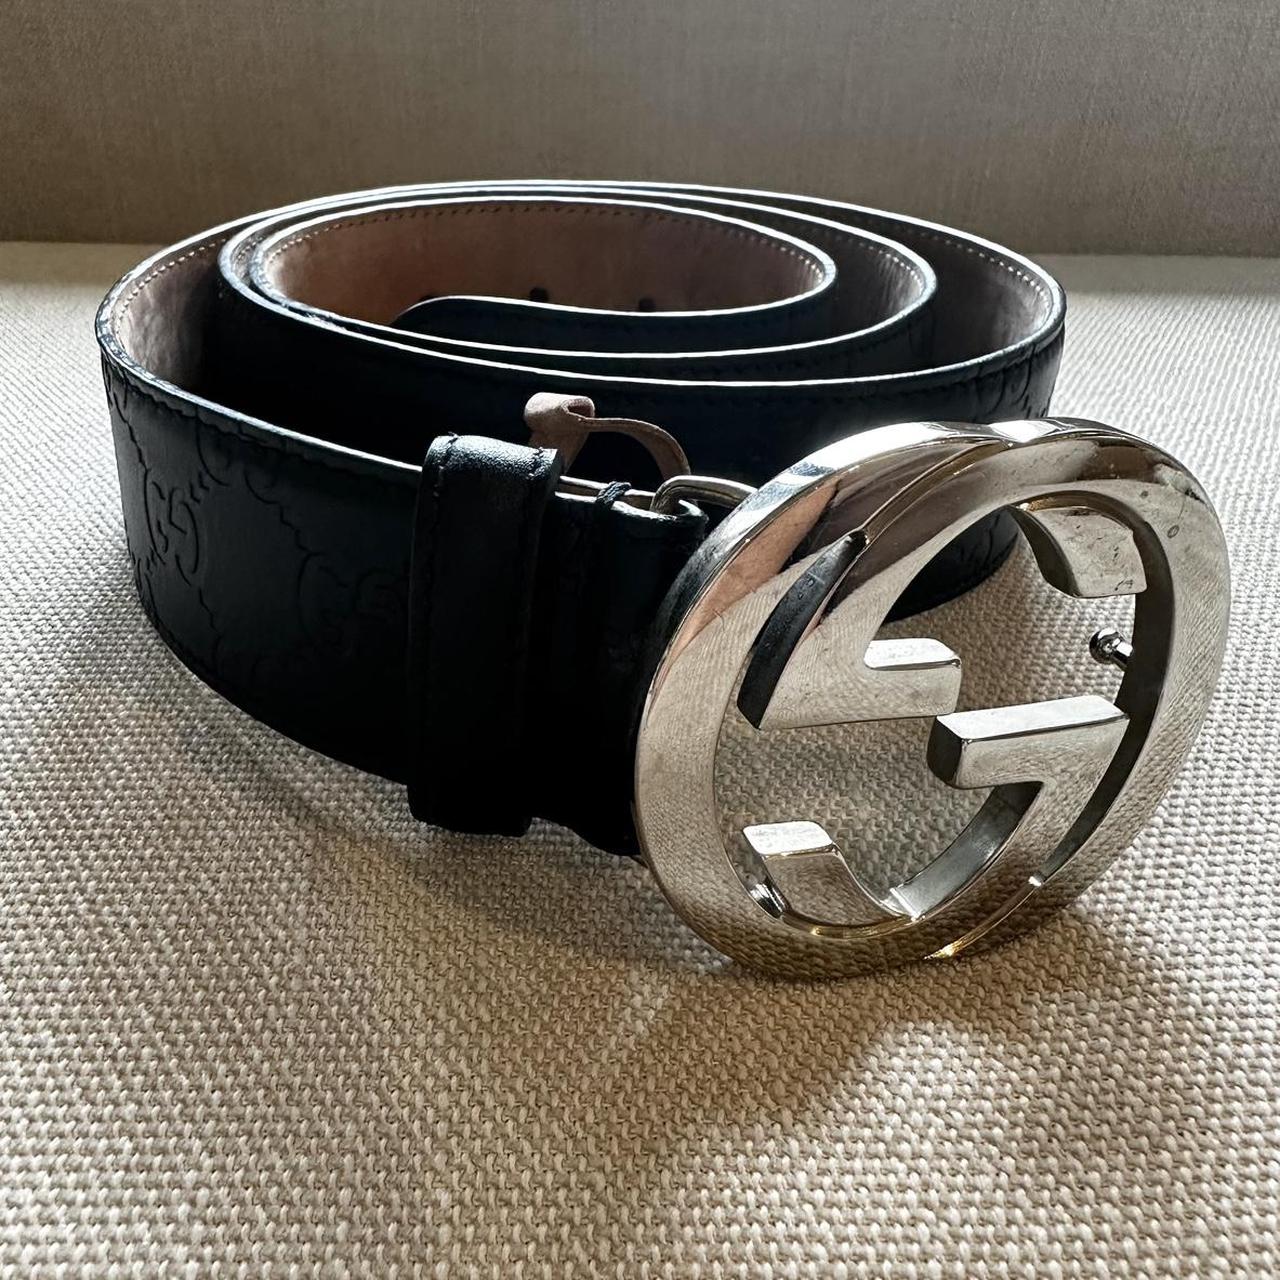 Men’s Gucci Signature Leather Belt. Real and... - Depop